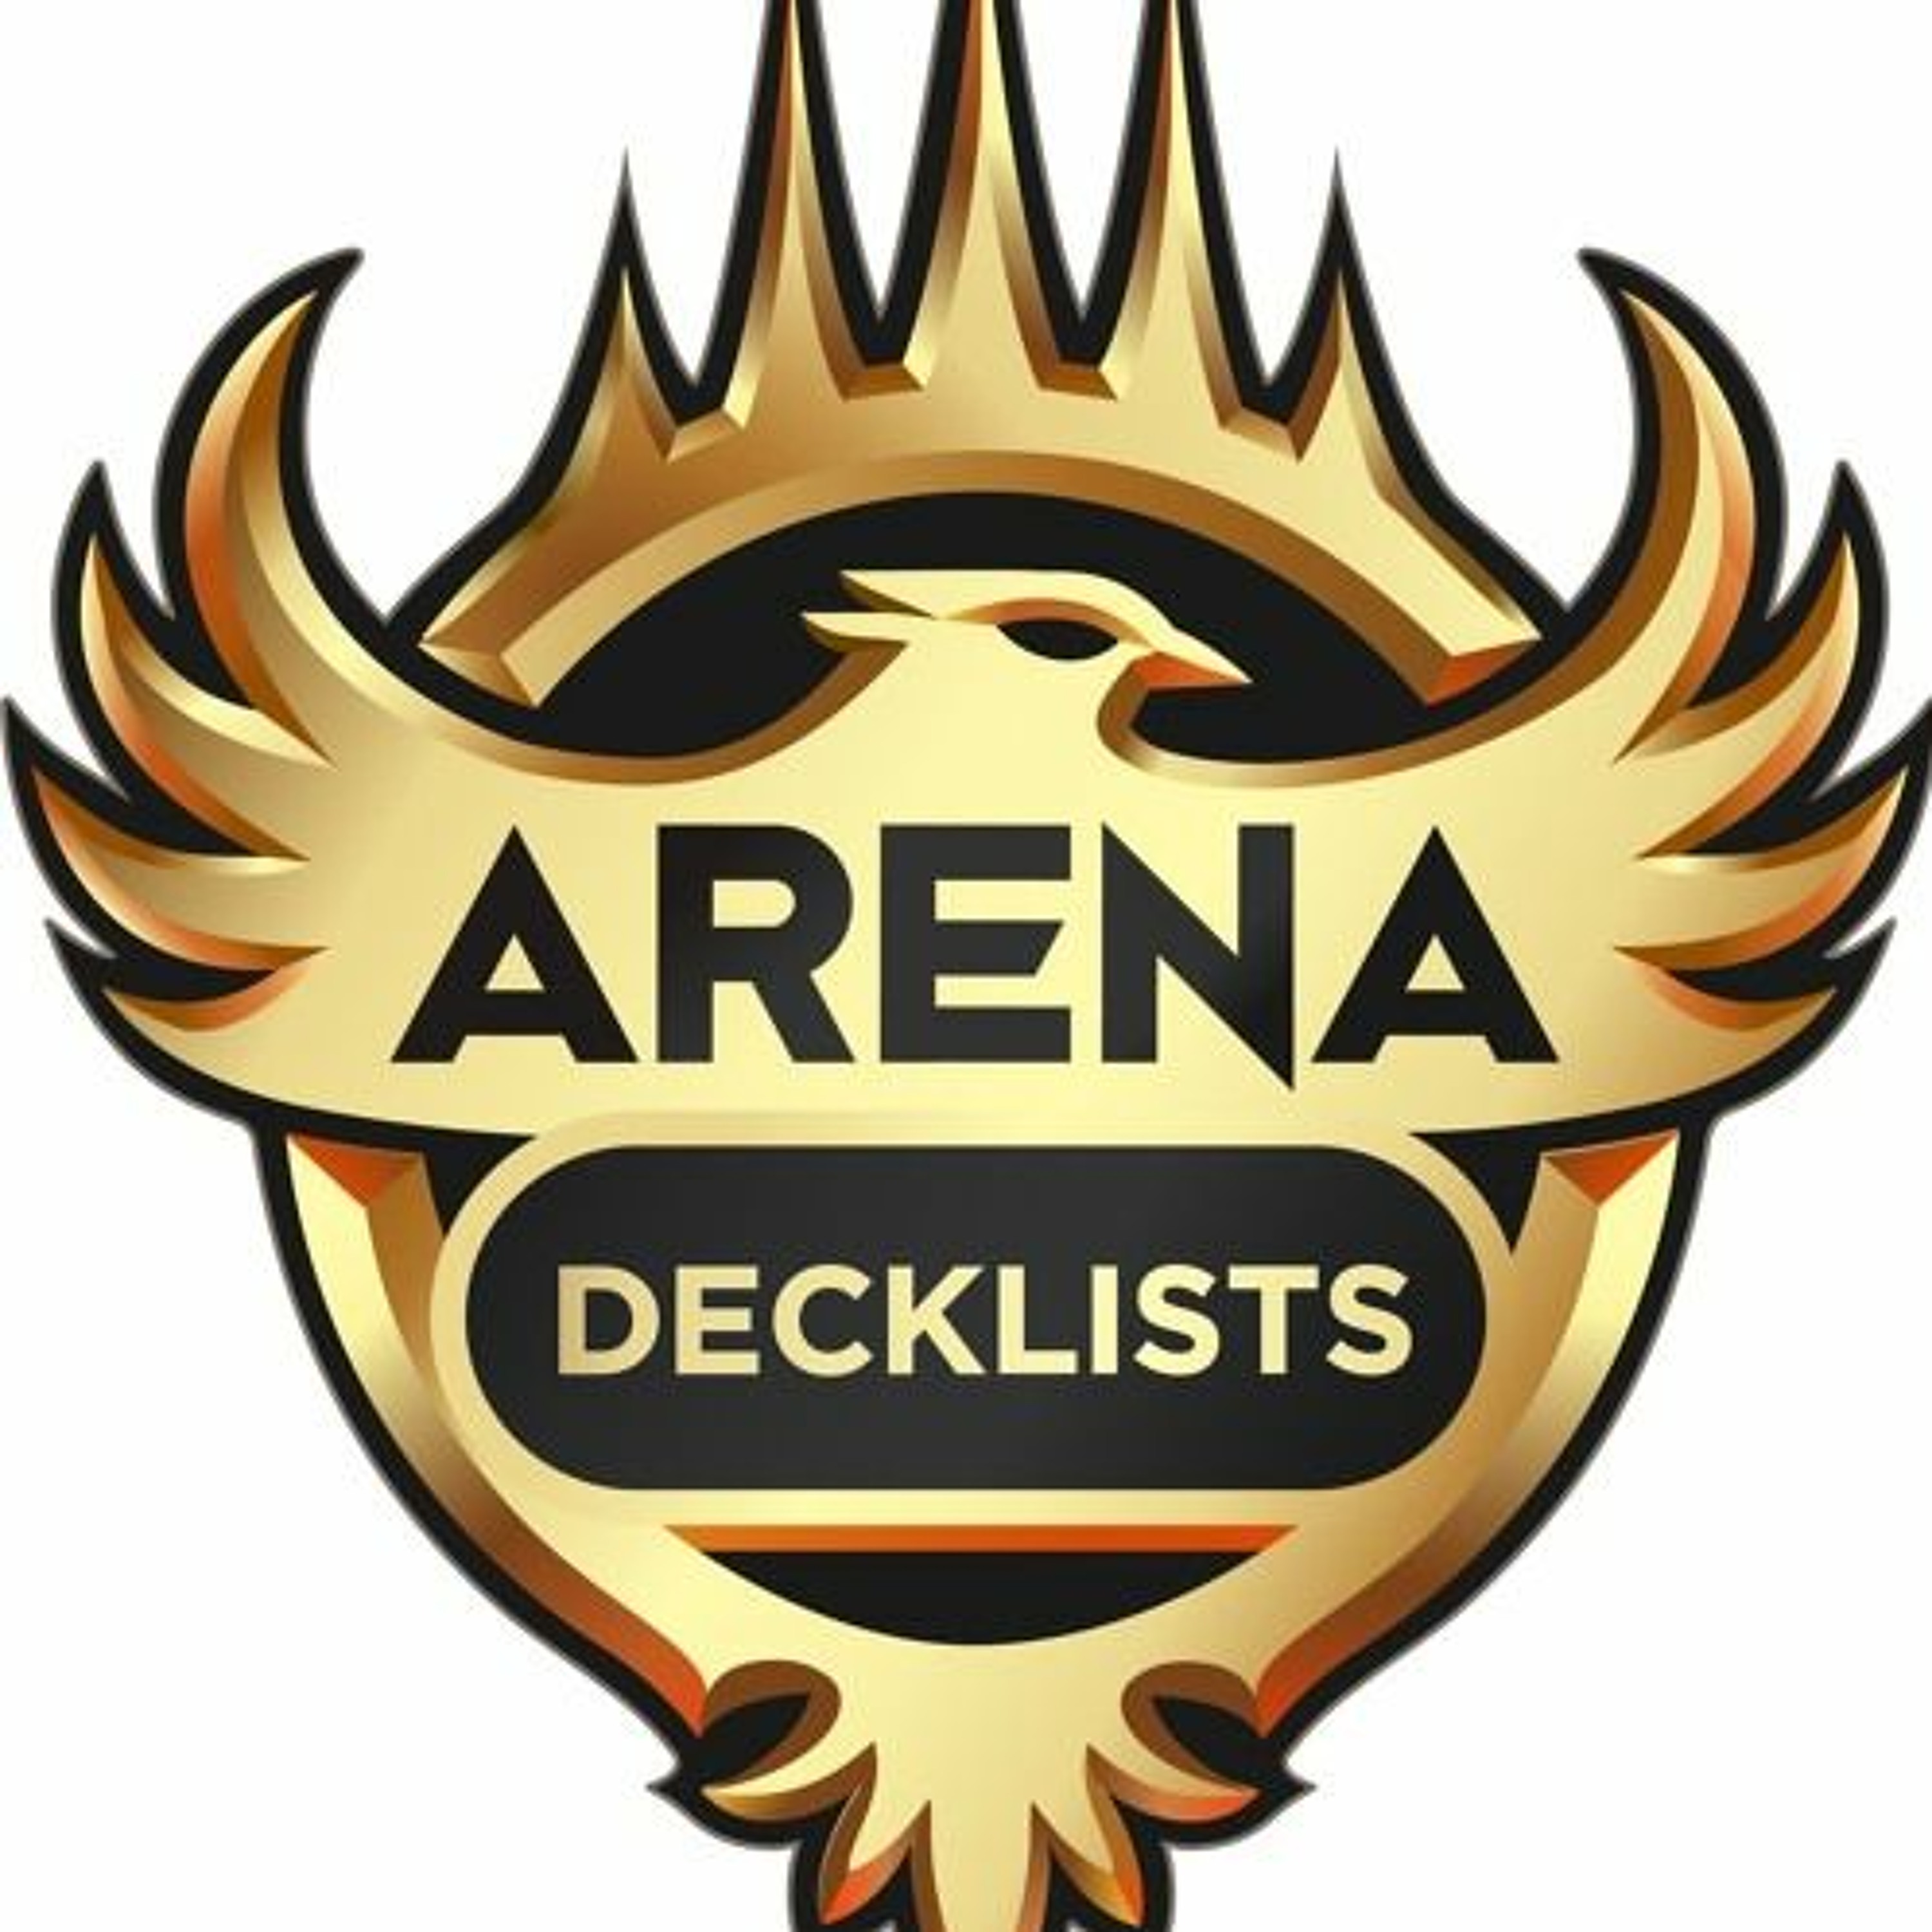 Gerry’s Decks For This Weekend